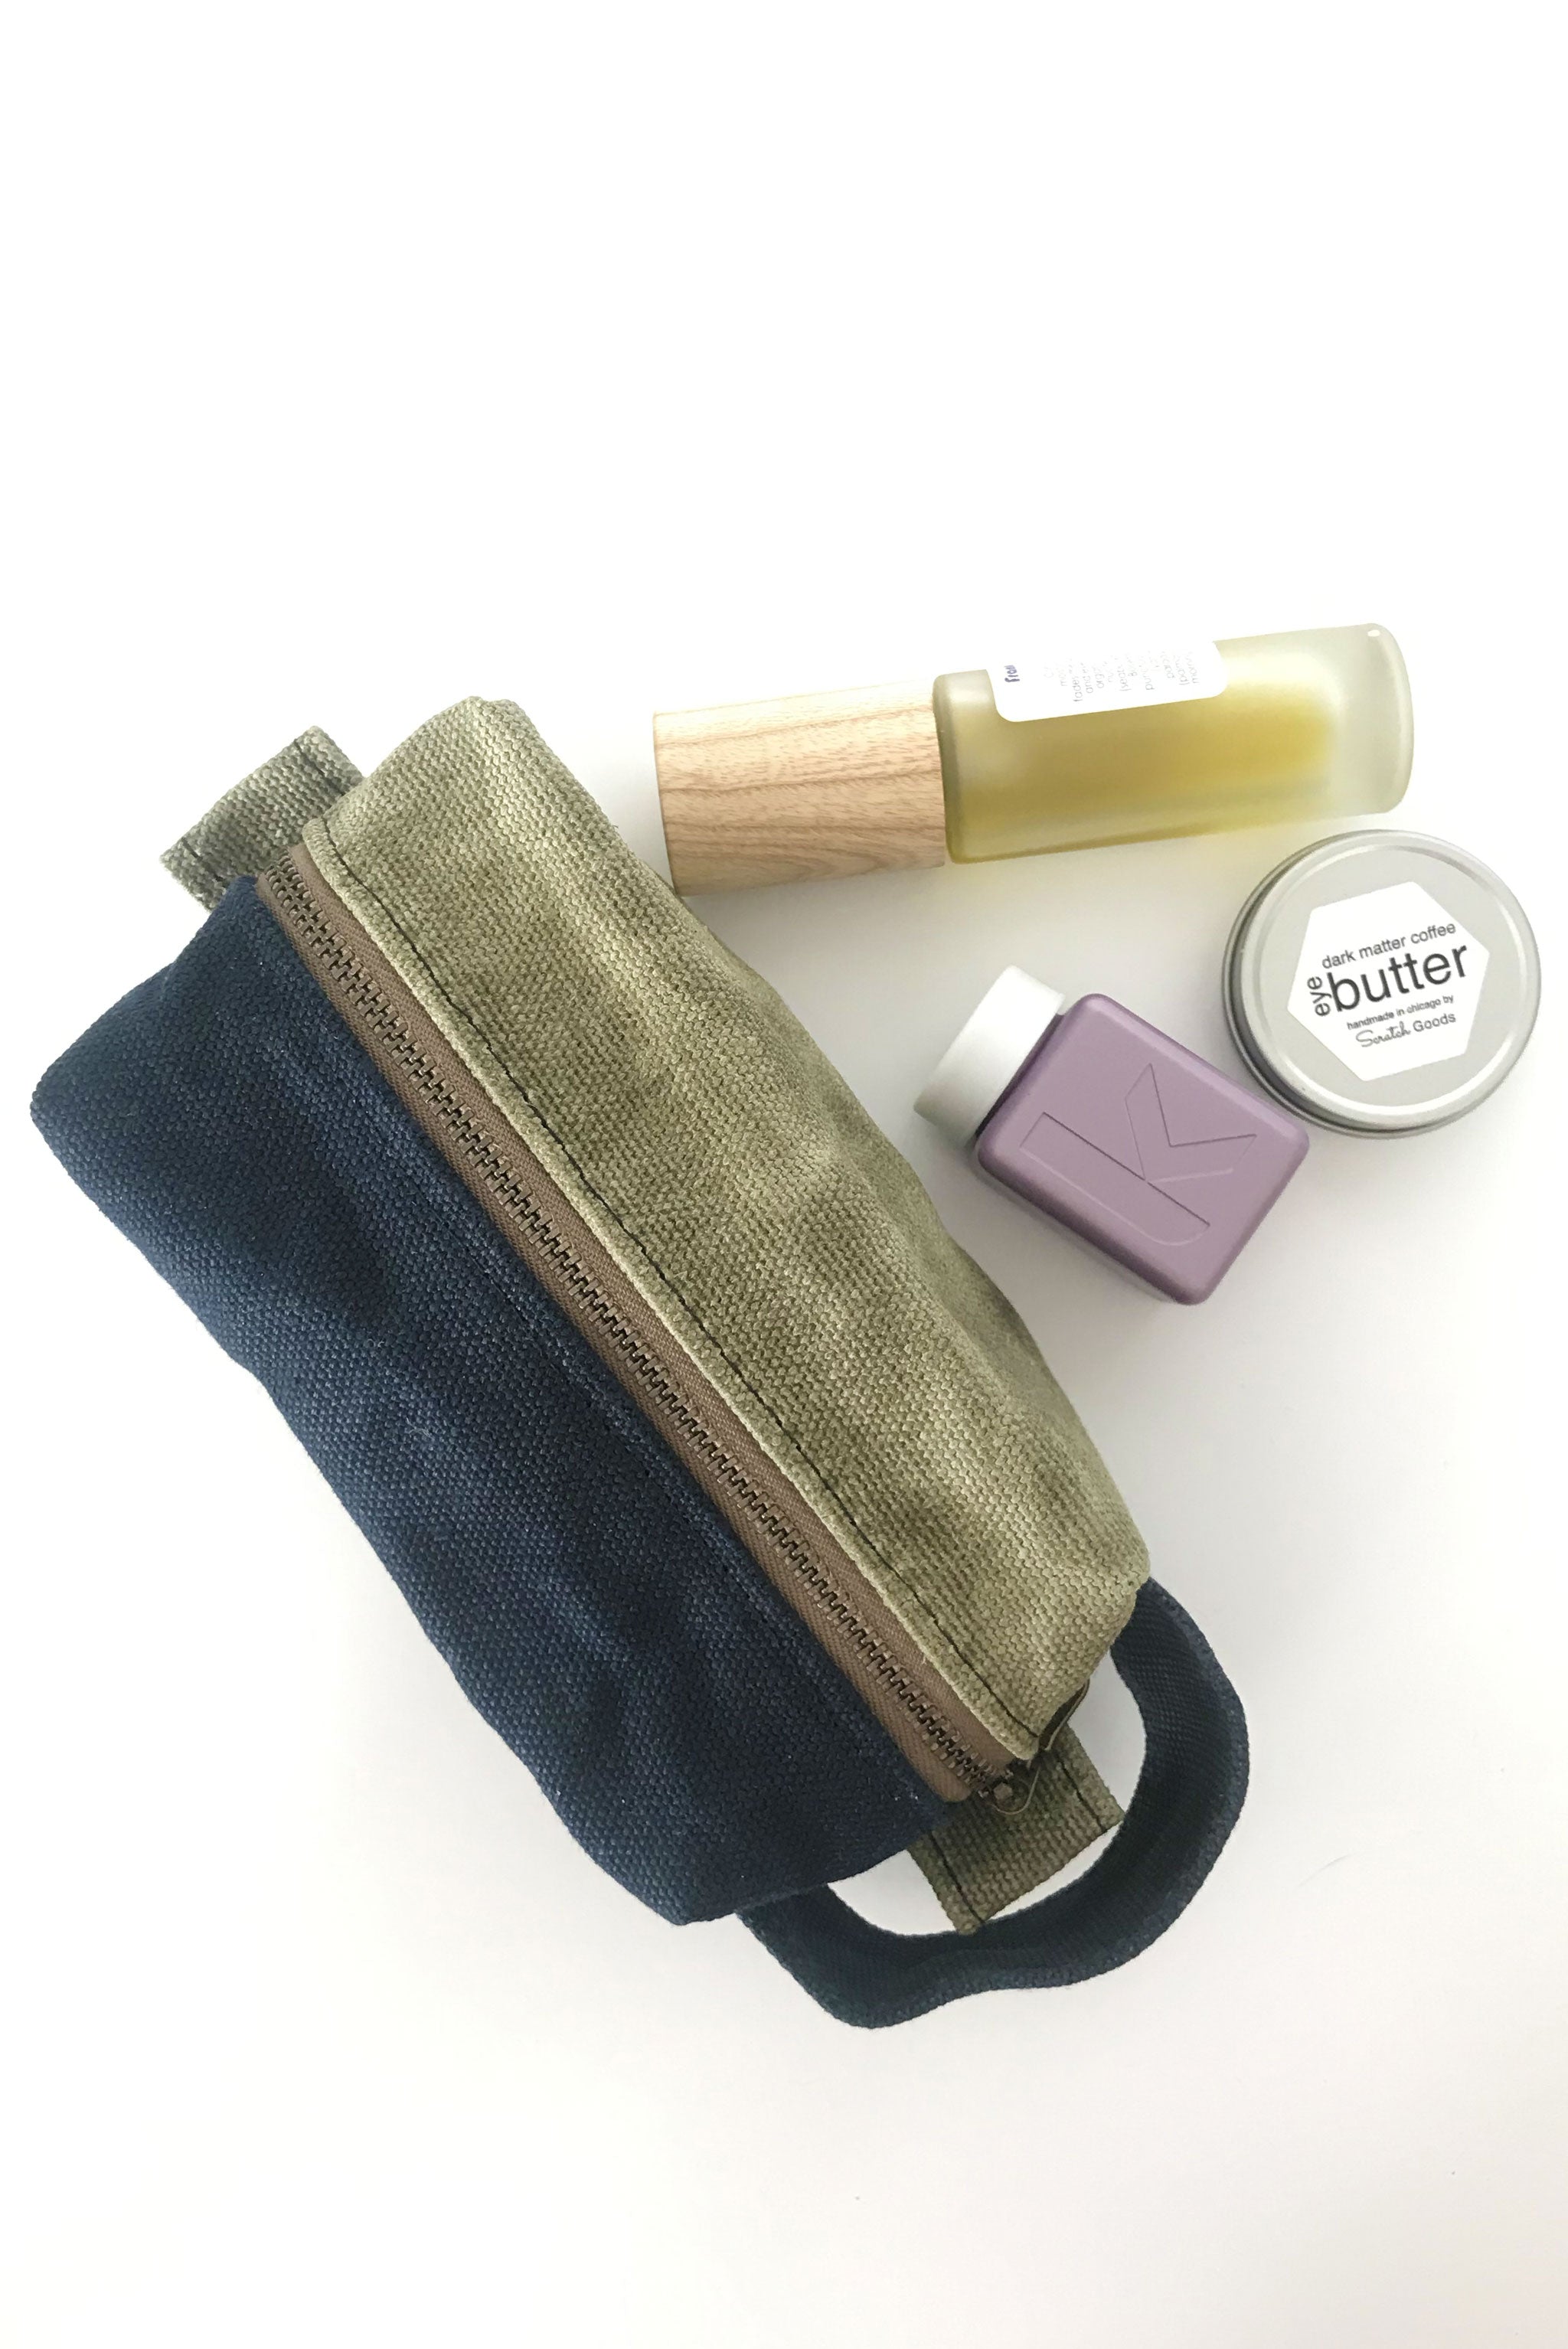 small waxed canvas toiletry bag with handle and brass zipper. The bag is closed and sits next to three small bottles and containers. The bag is half sage green and half dark navy blue. 